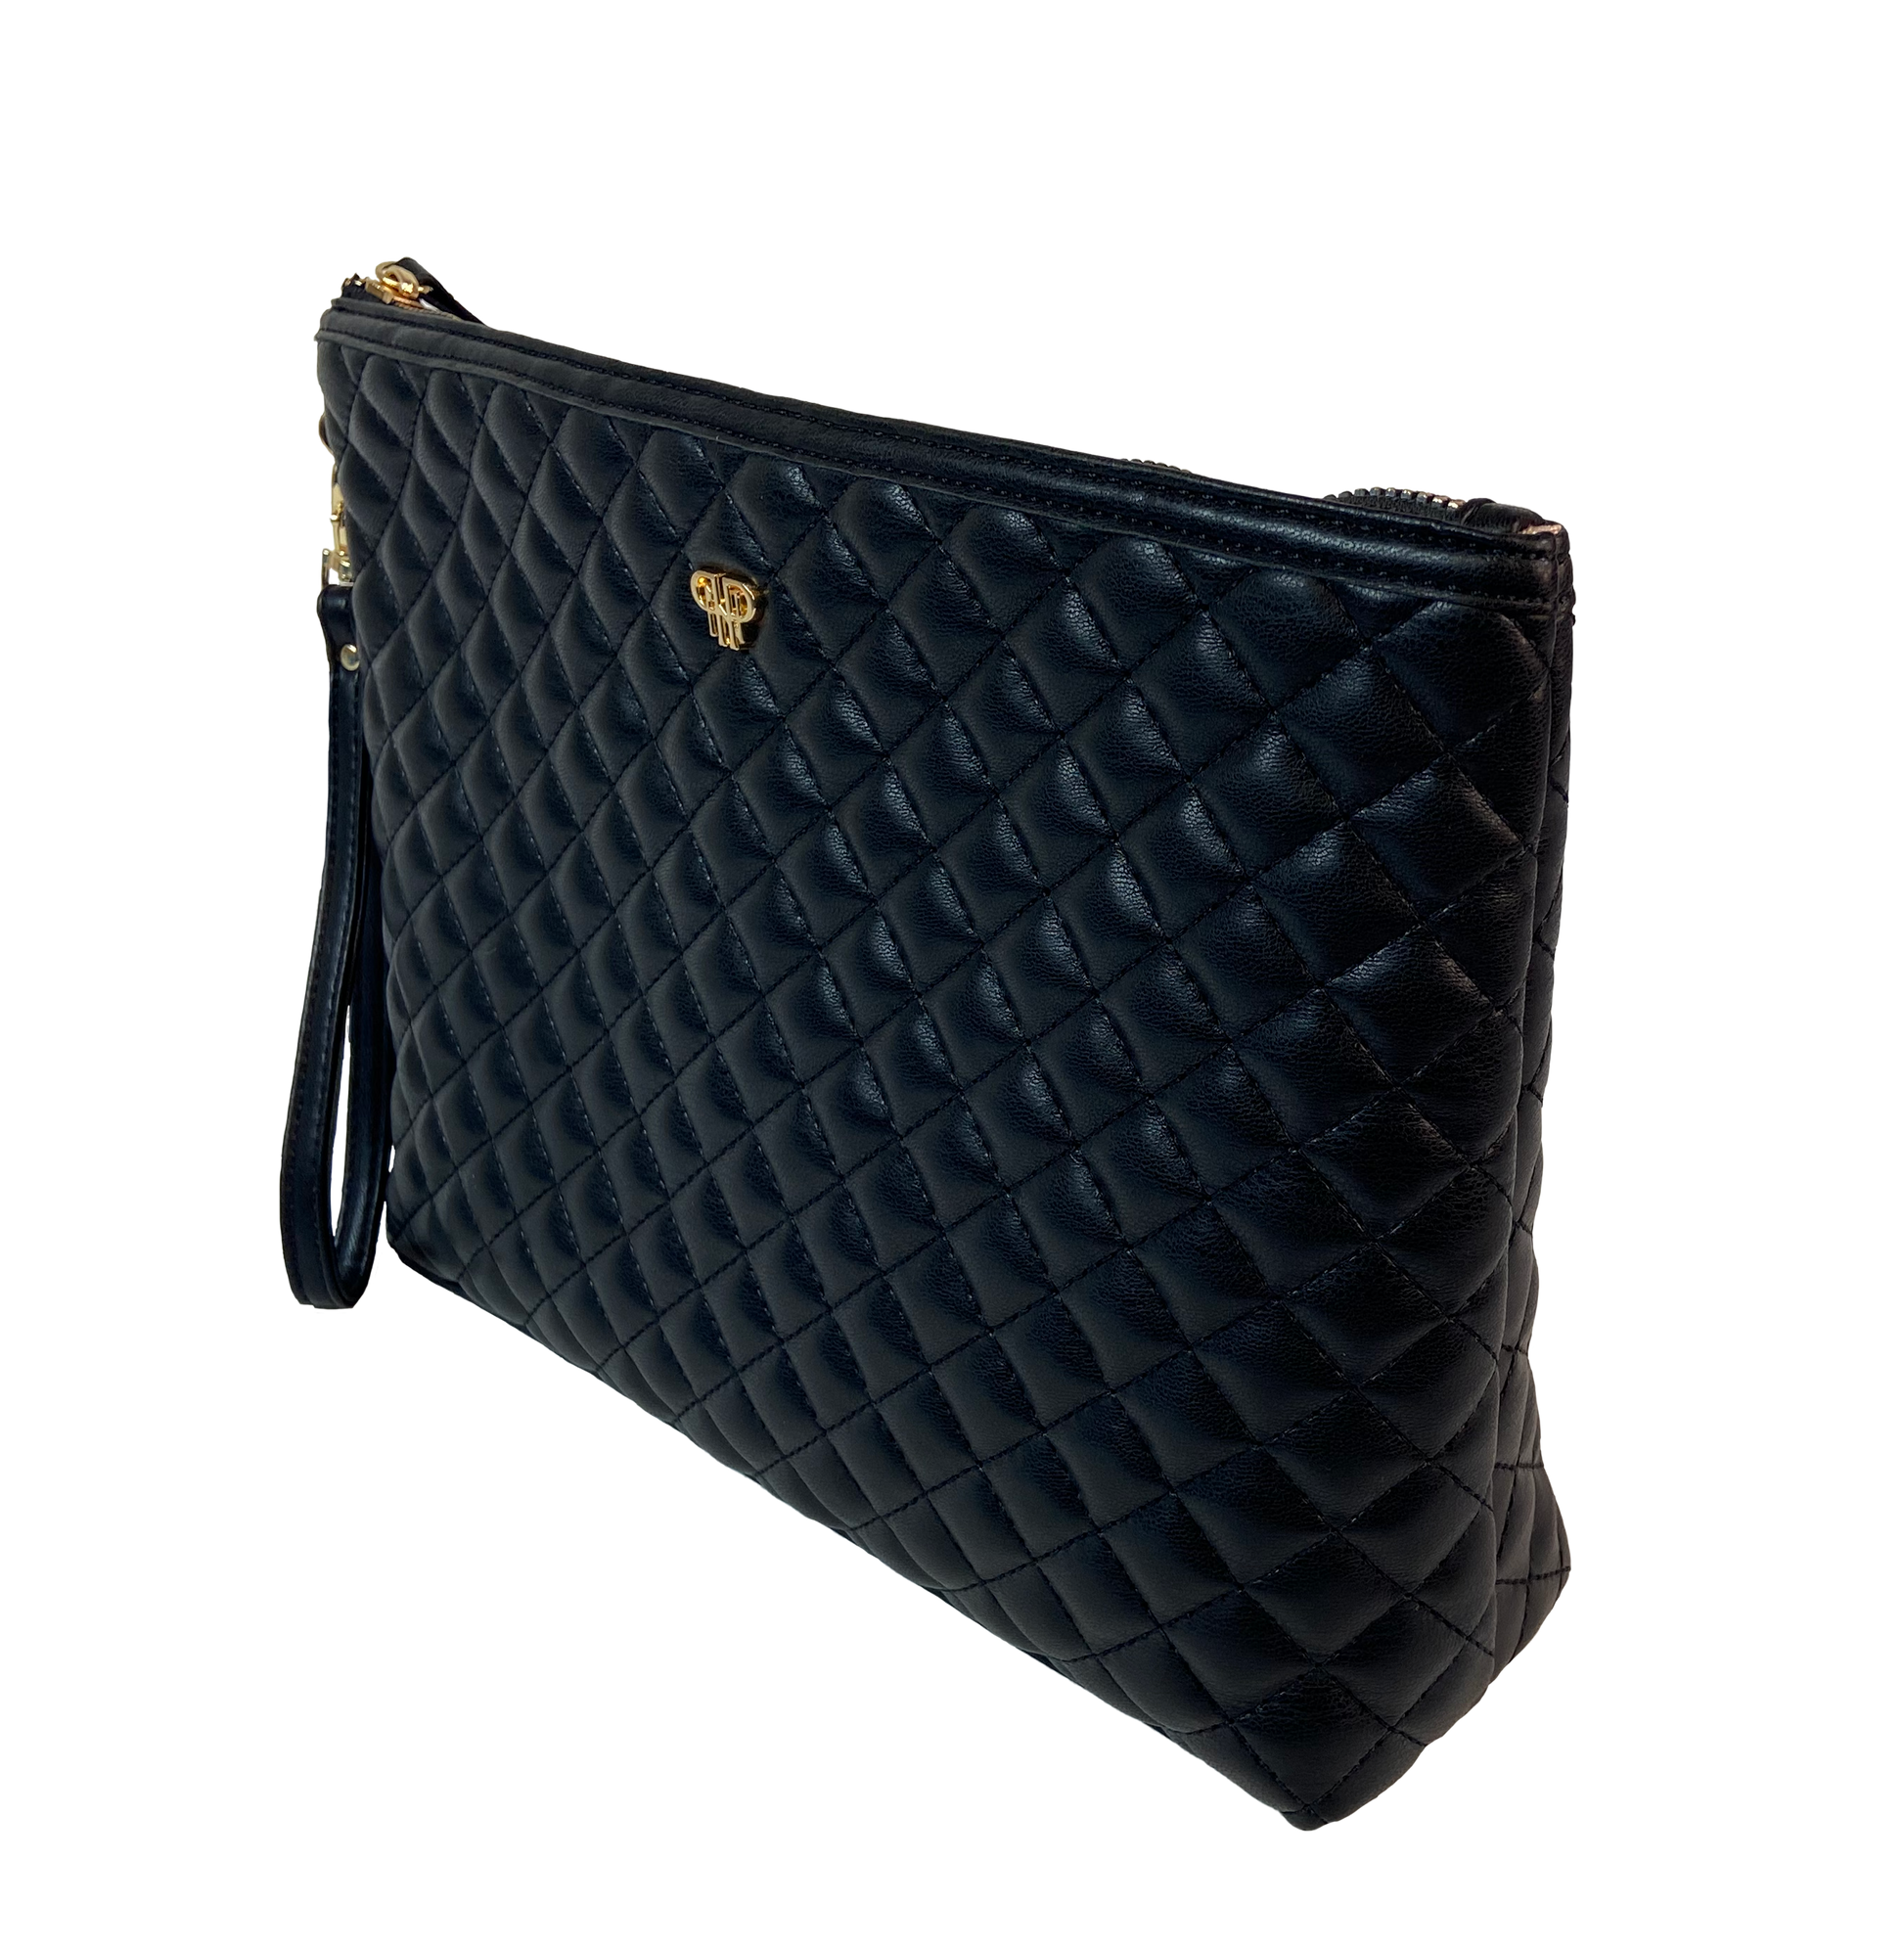 A Closer Look: Chanel Large Quilted Pouch Bag